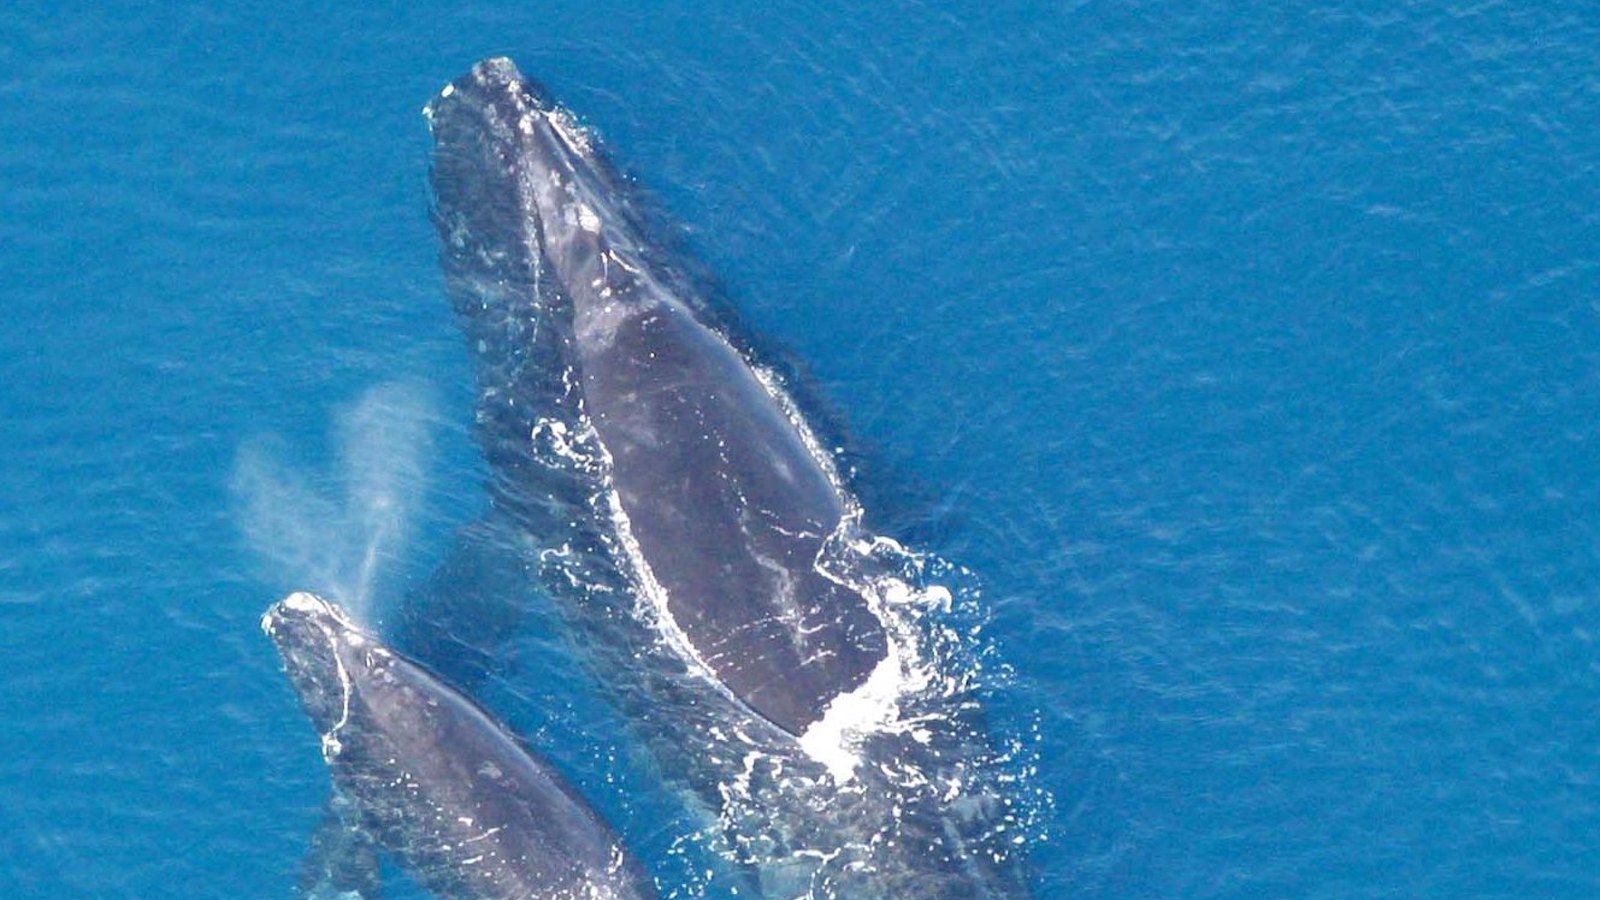 A North Atlantic Right whale and her calf breach the surface